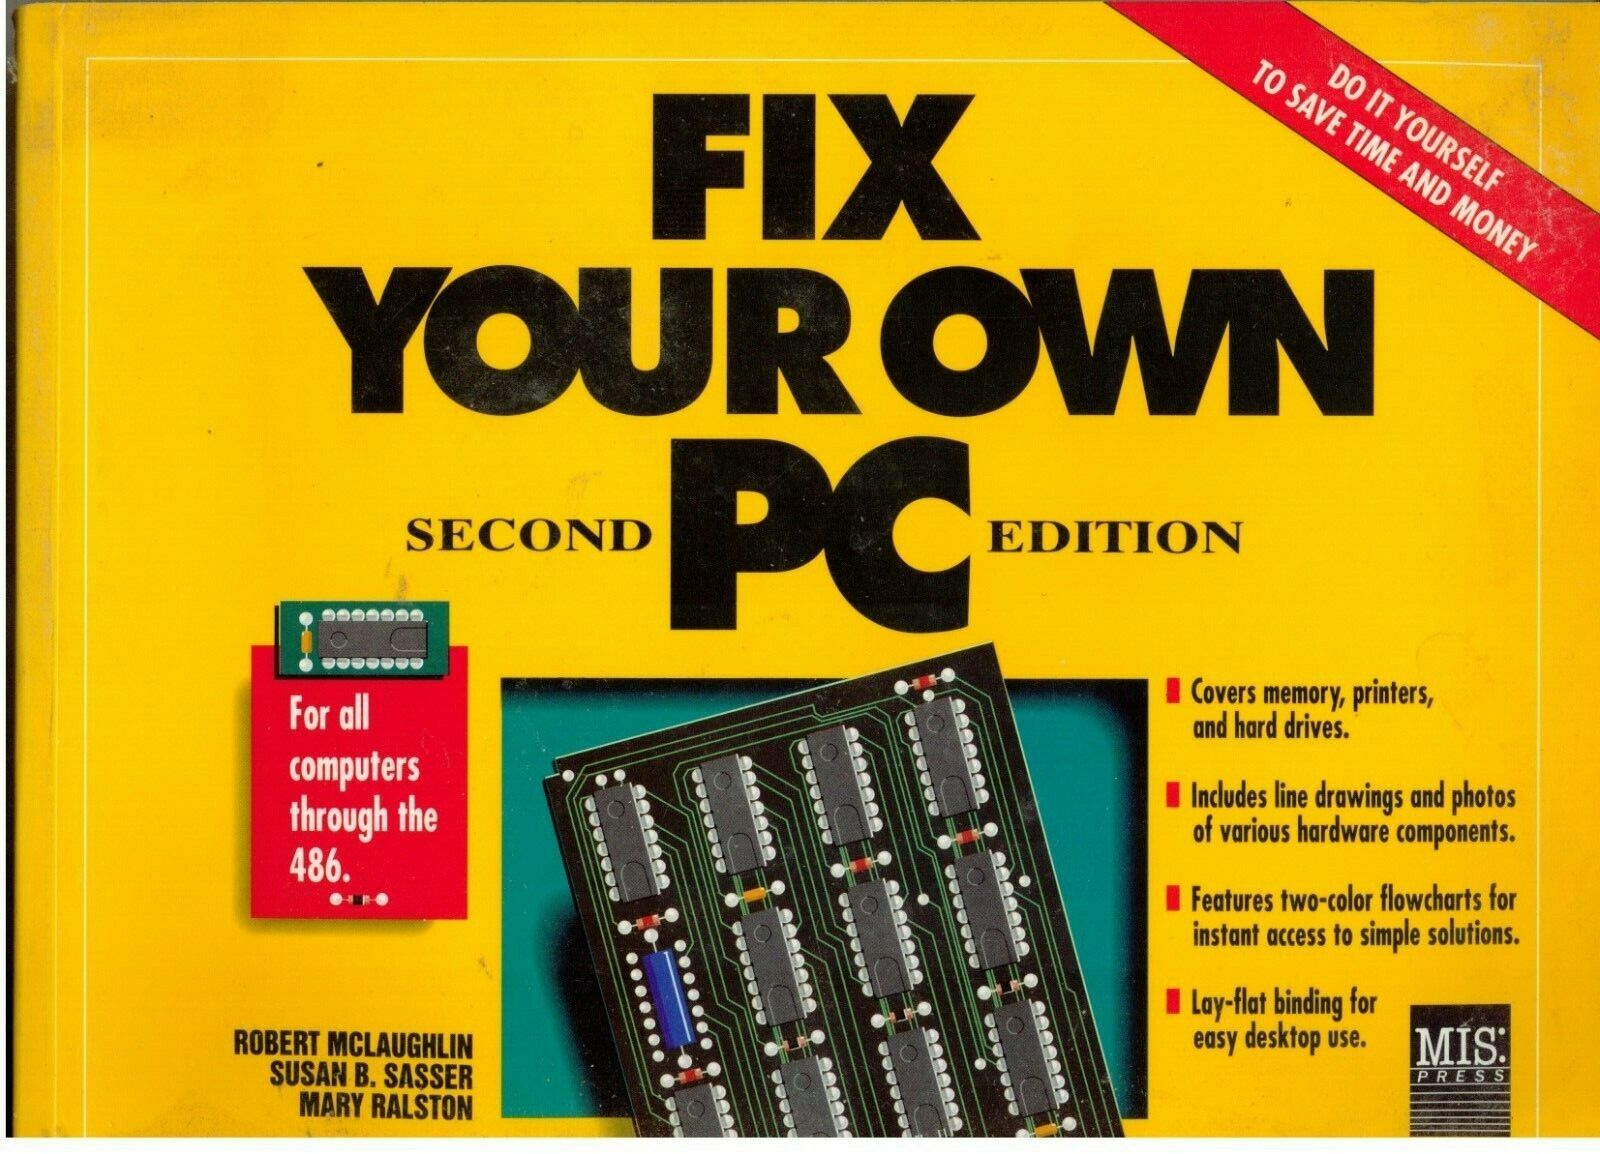 ITHistory (1992) BOOK: FIX YOUR OWN PC (2nd Ed) (McLaughlin/ Sasser/ Ralston)